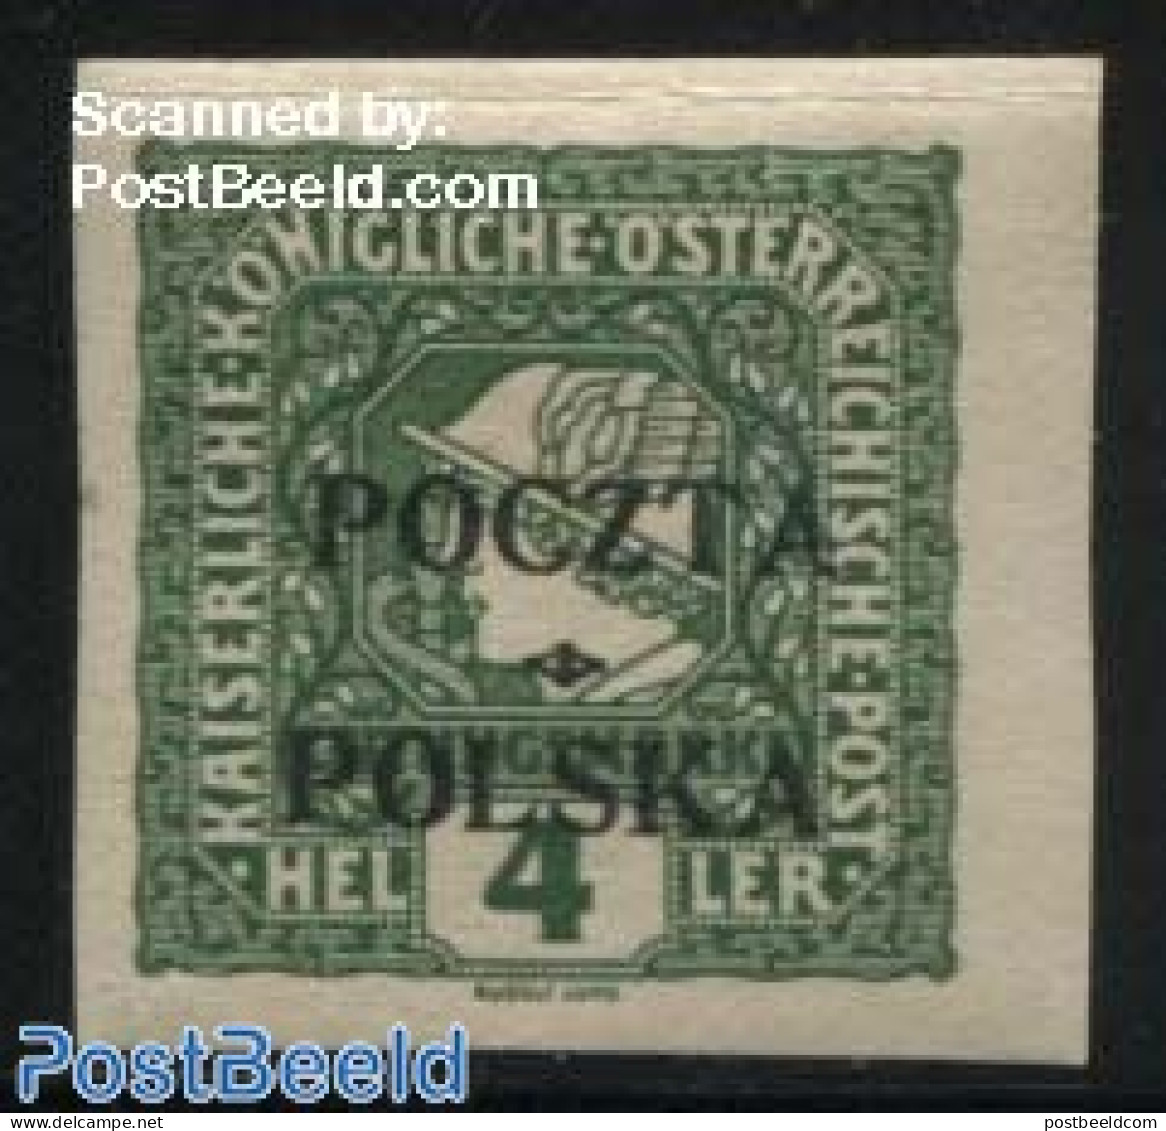 Poland 1919 4H, Stamp Out Of Set, Unused (hinged) - Nuevos